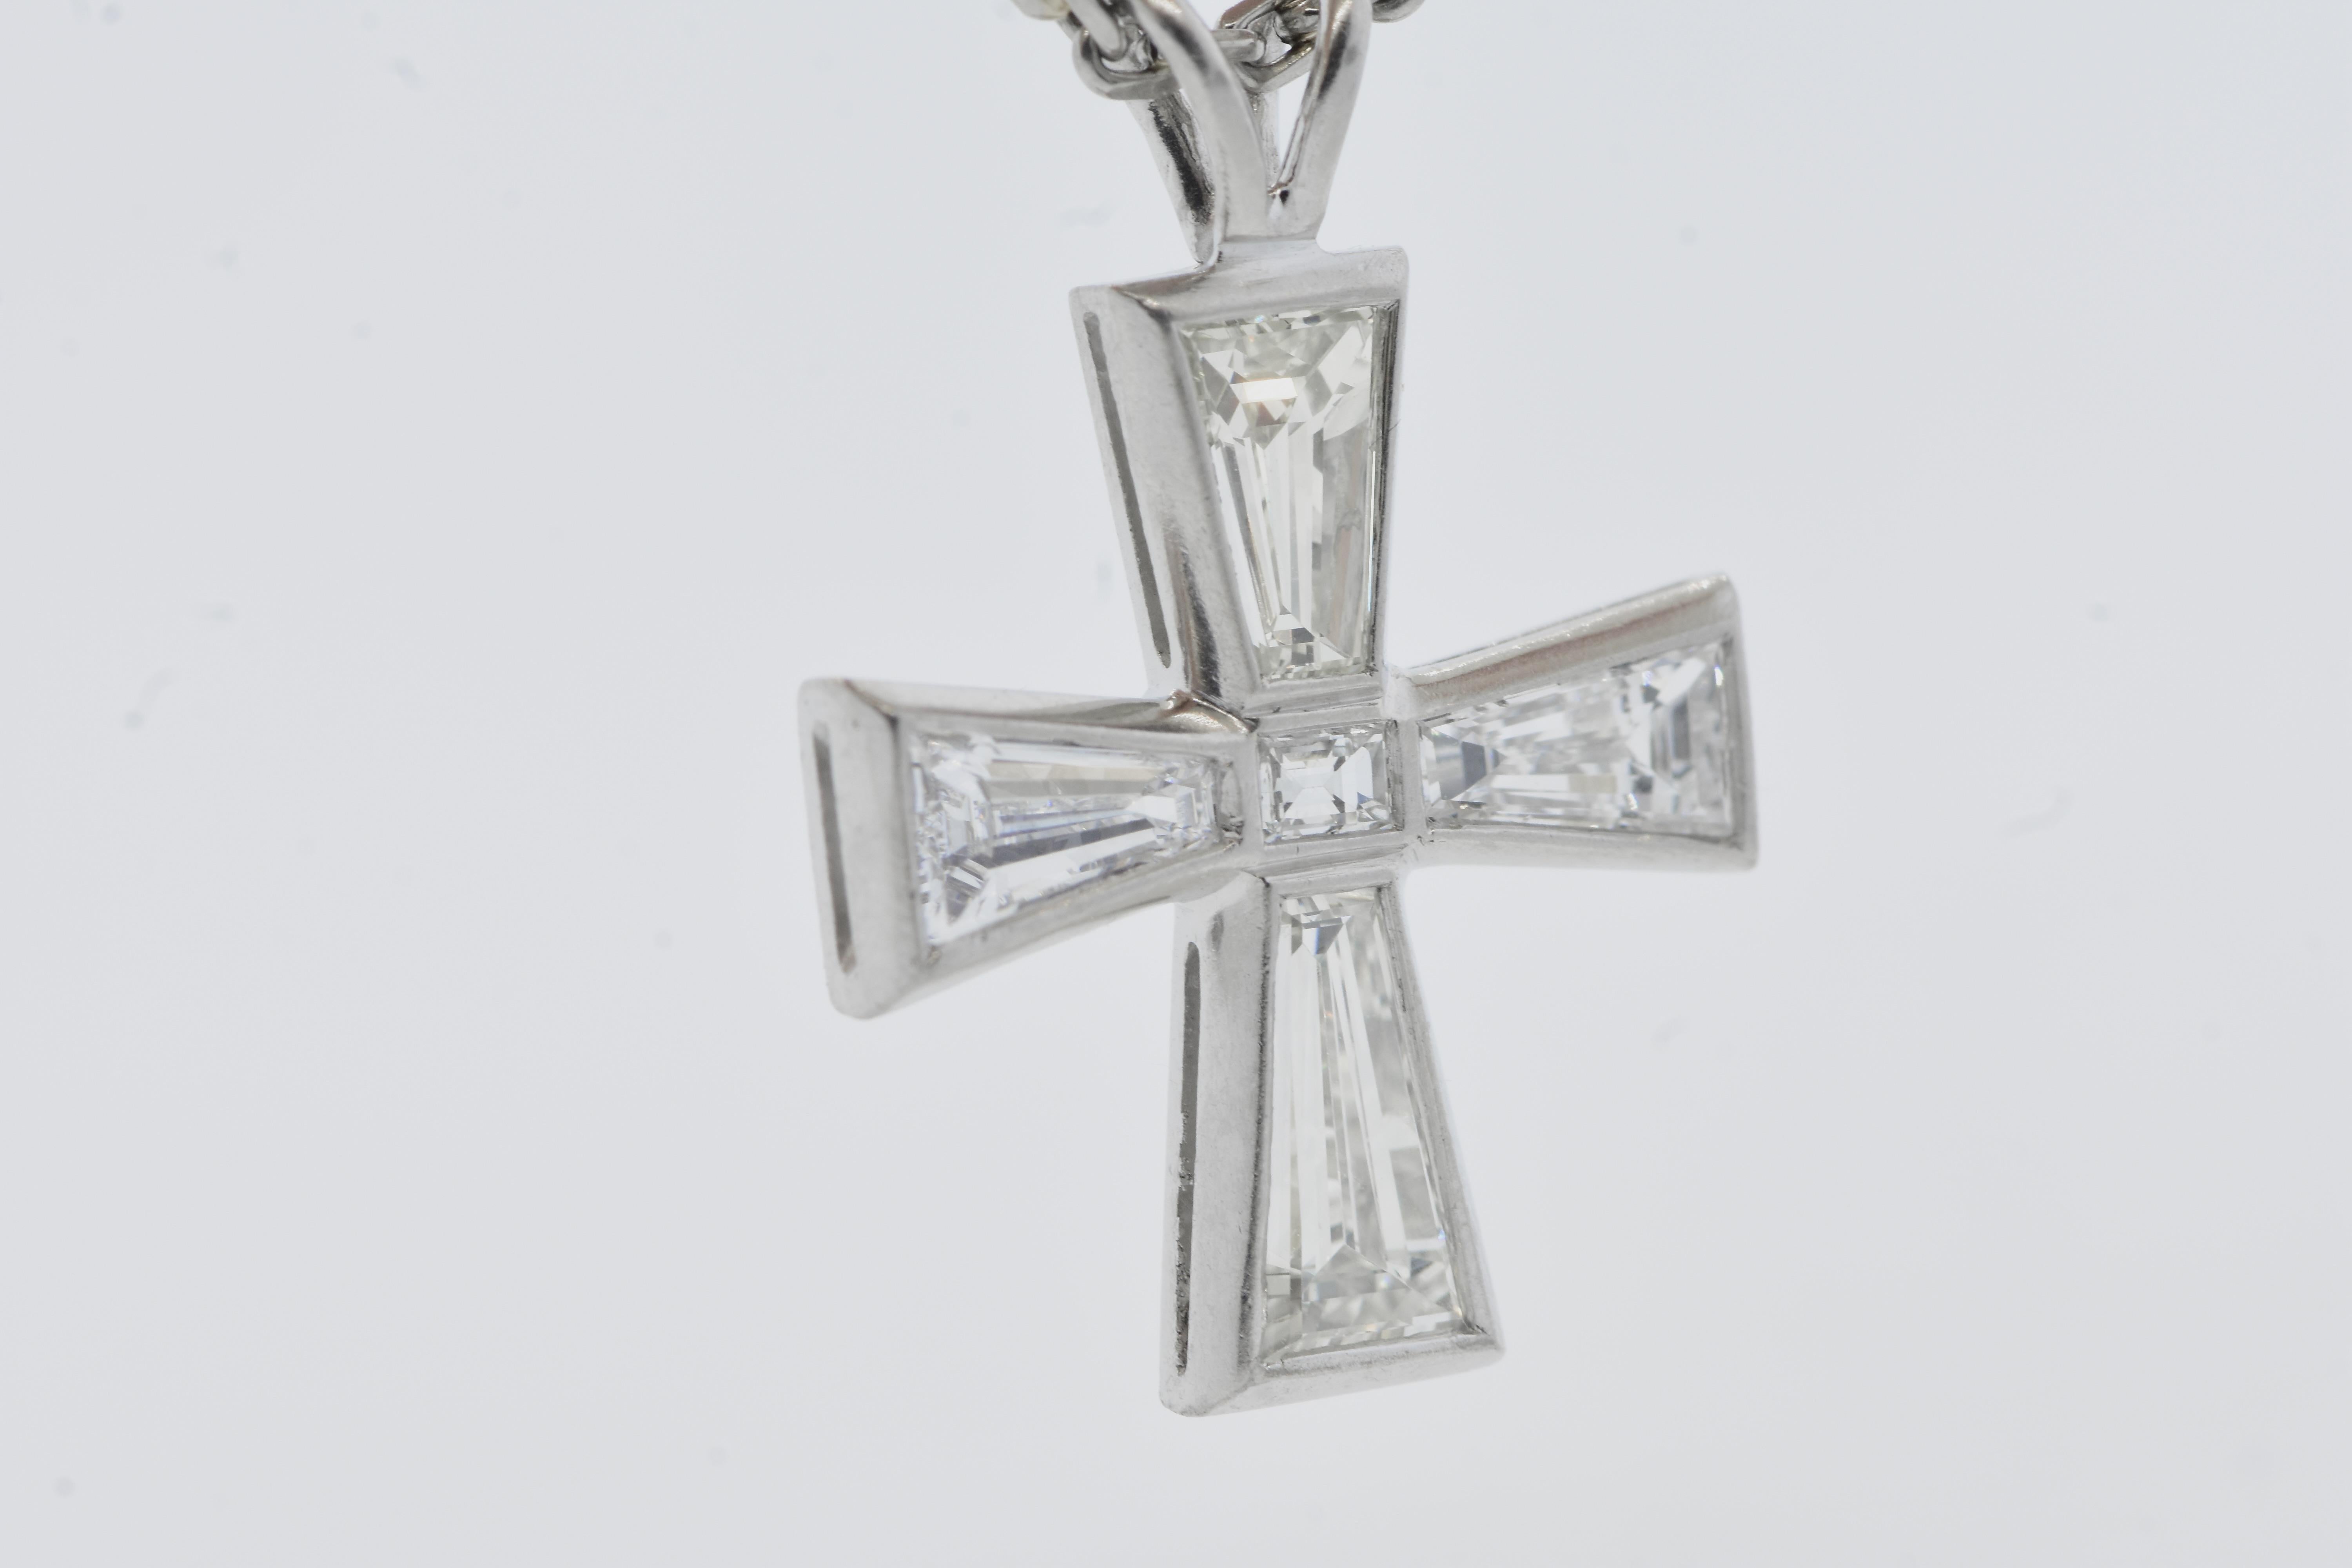 Diamond maltese cross composed of 4 fancy tapered baguette cut diamonds and a small rectangular cut diamond.  Resting on a platinum chain, this platinum maltese cross has an estimated 2.5 cts of fancy cut diamonds, bezel set and set girdle to